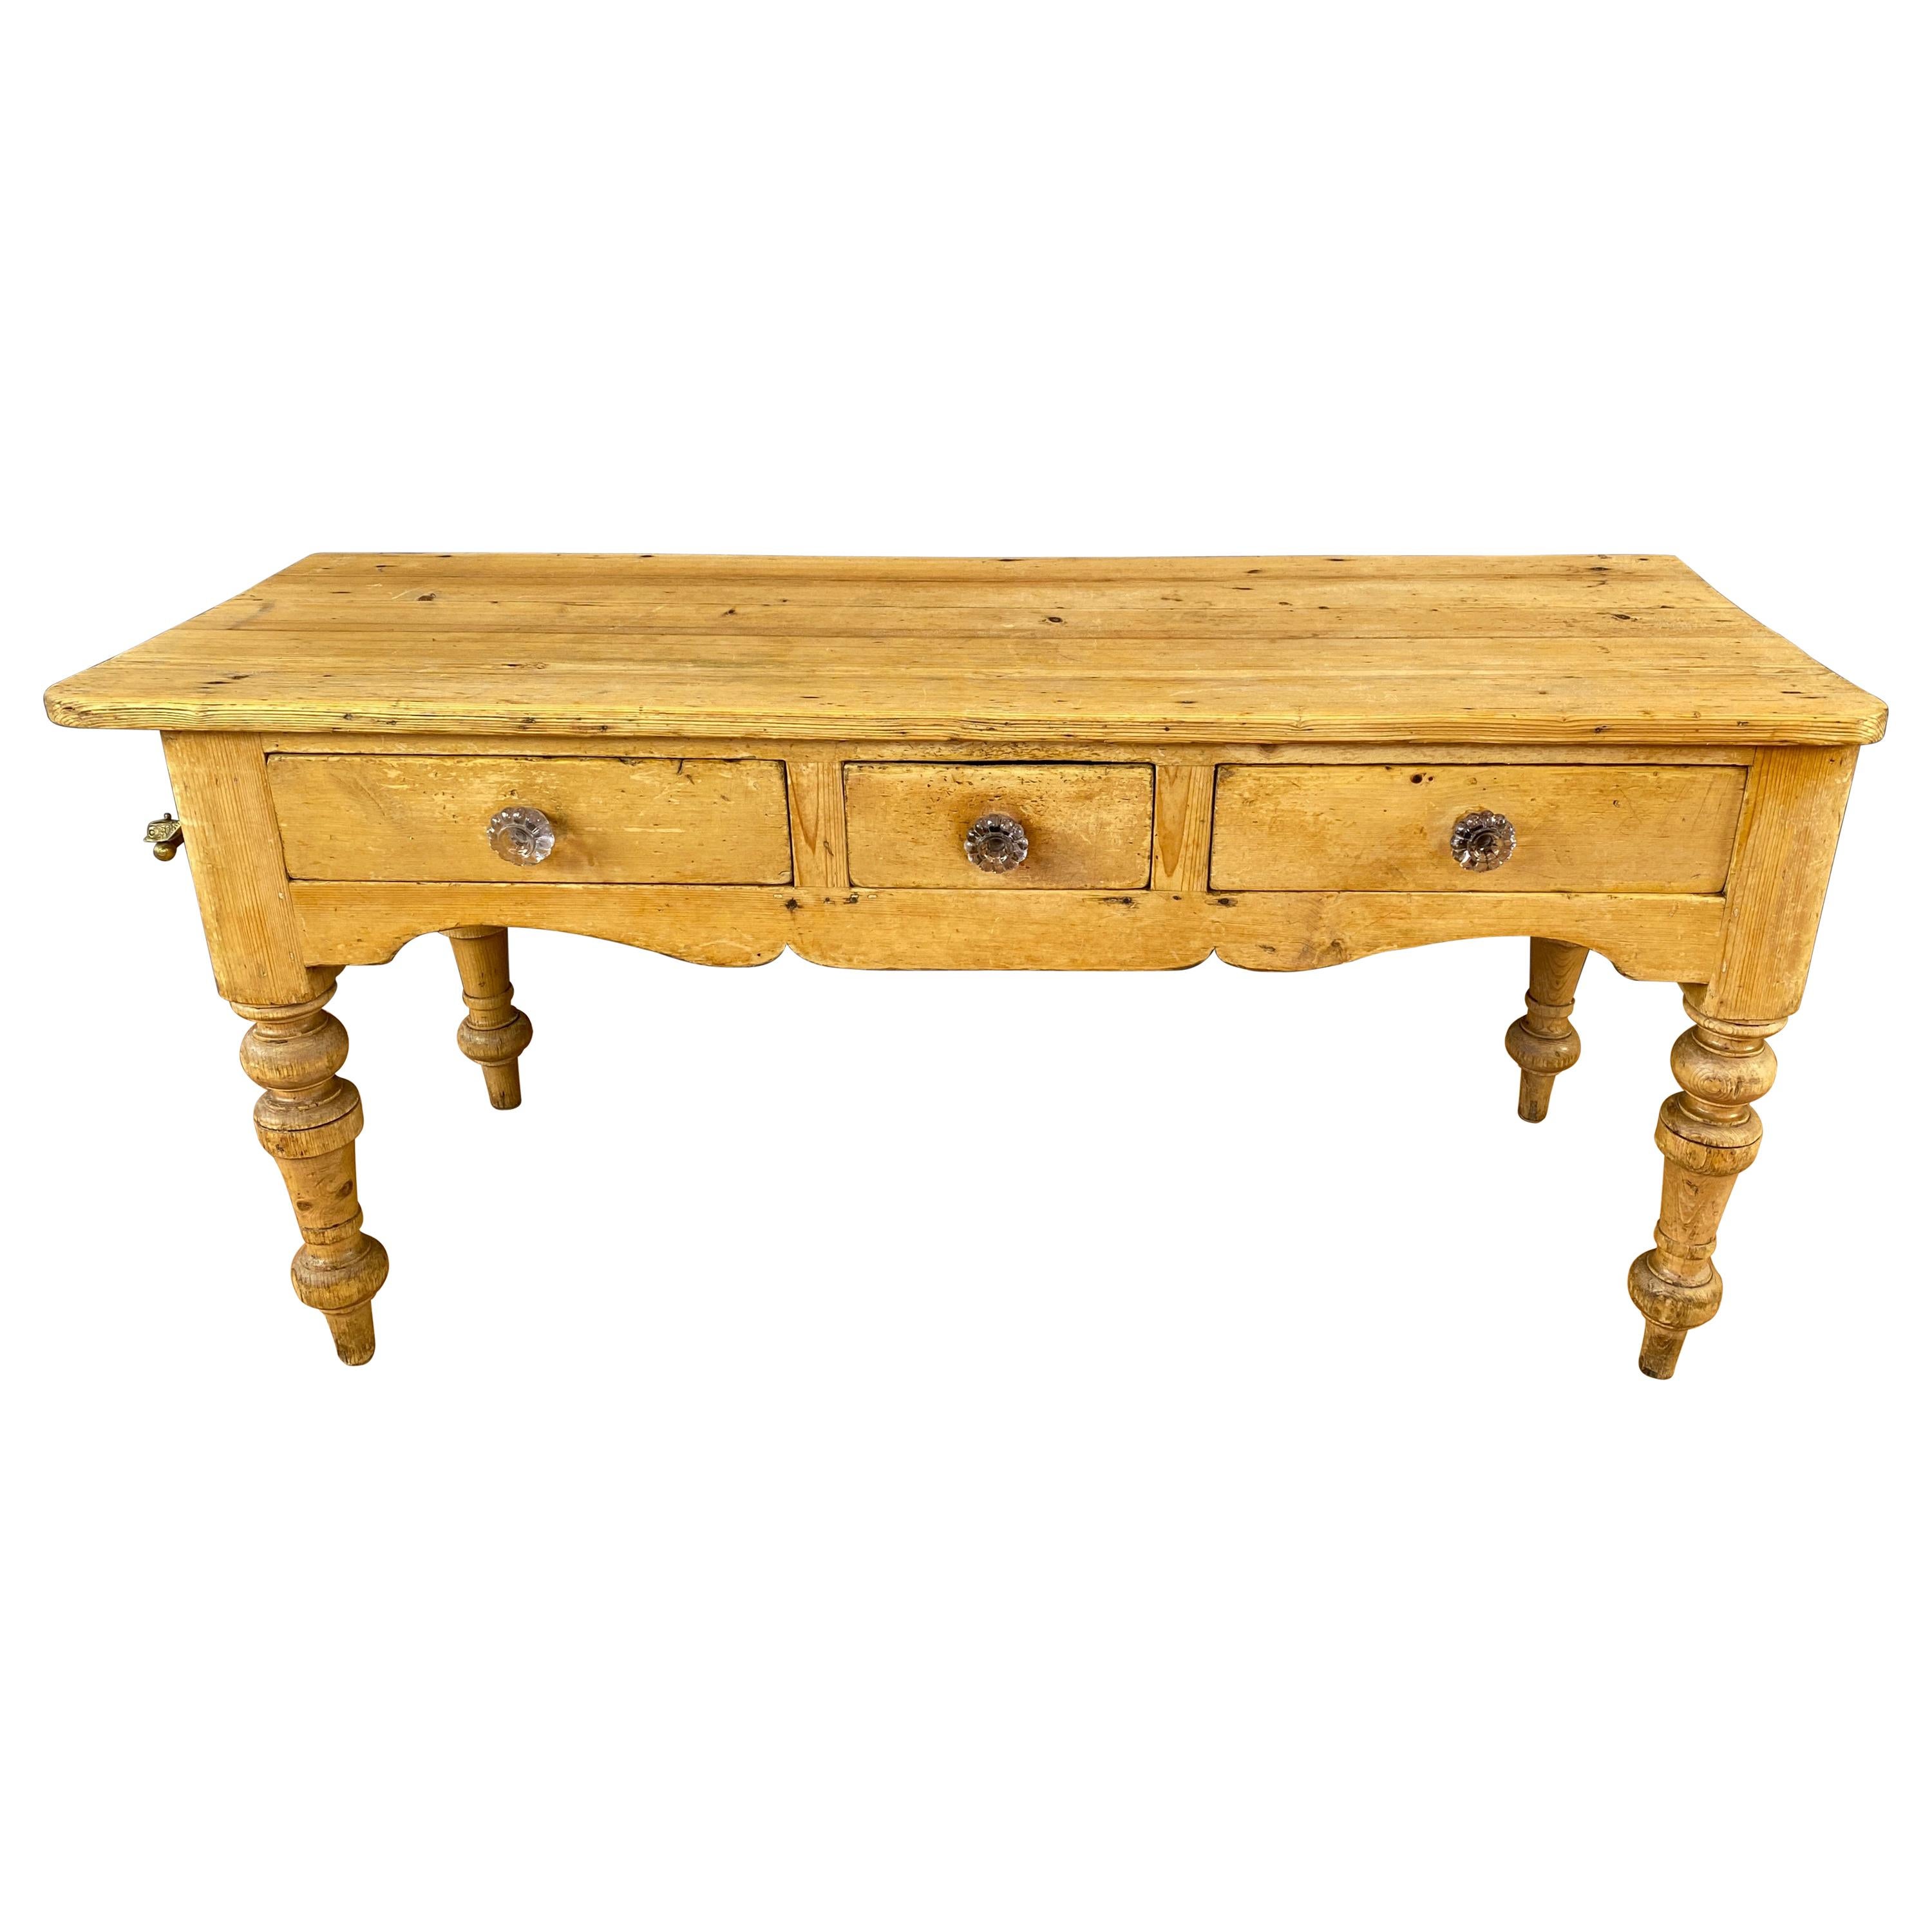 19th Century French Country Pine Farmhouse Table